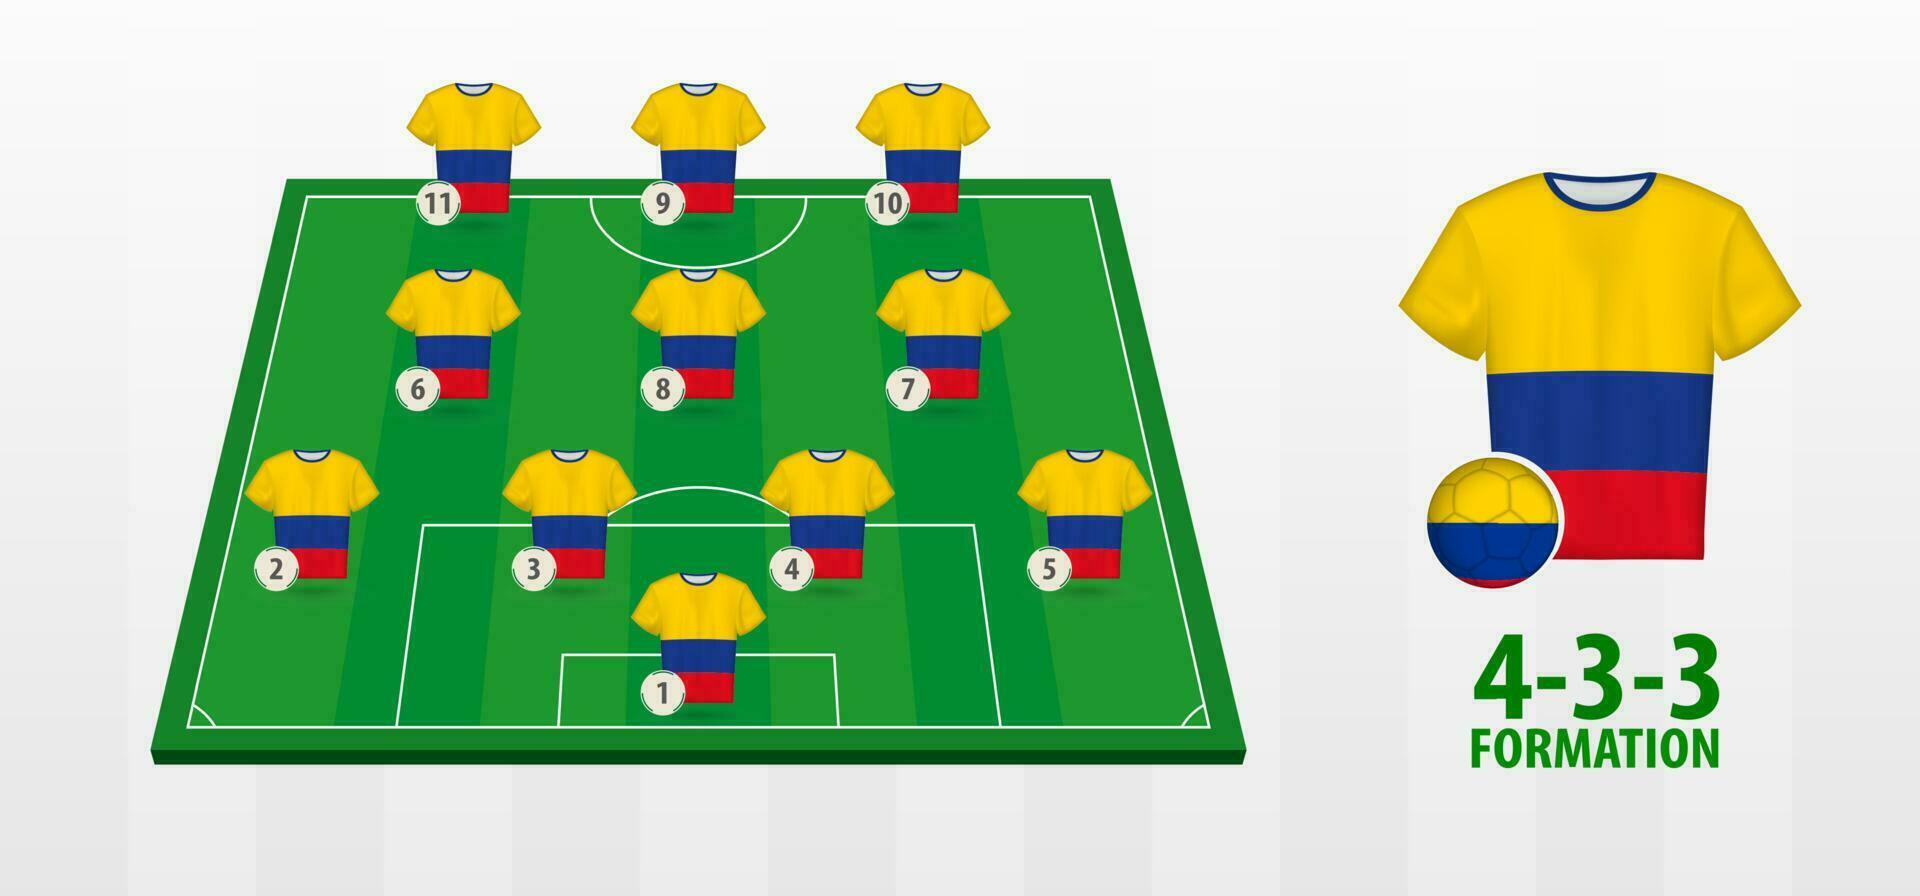 Colombia National Football Team Formation on Football Field. vector